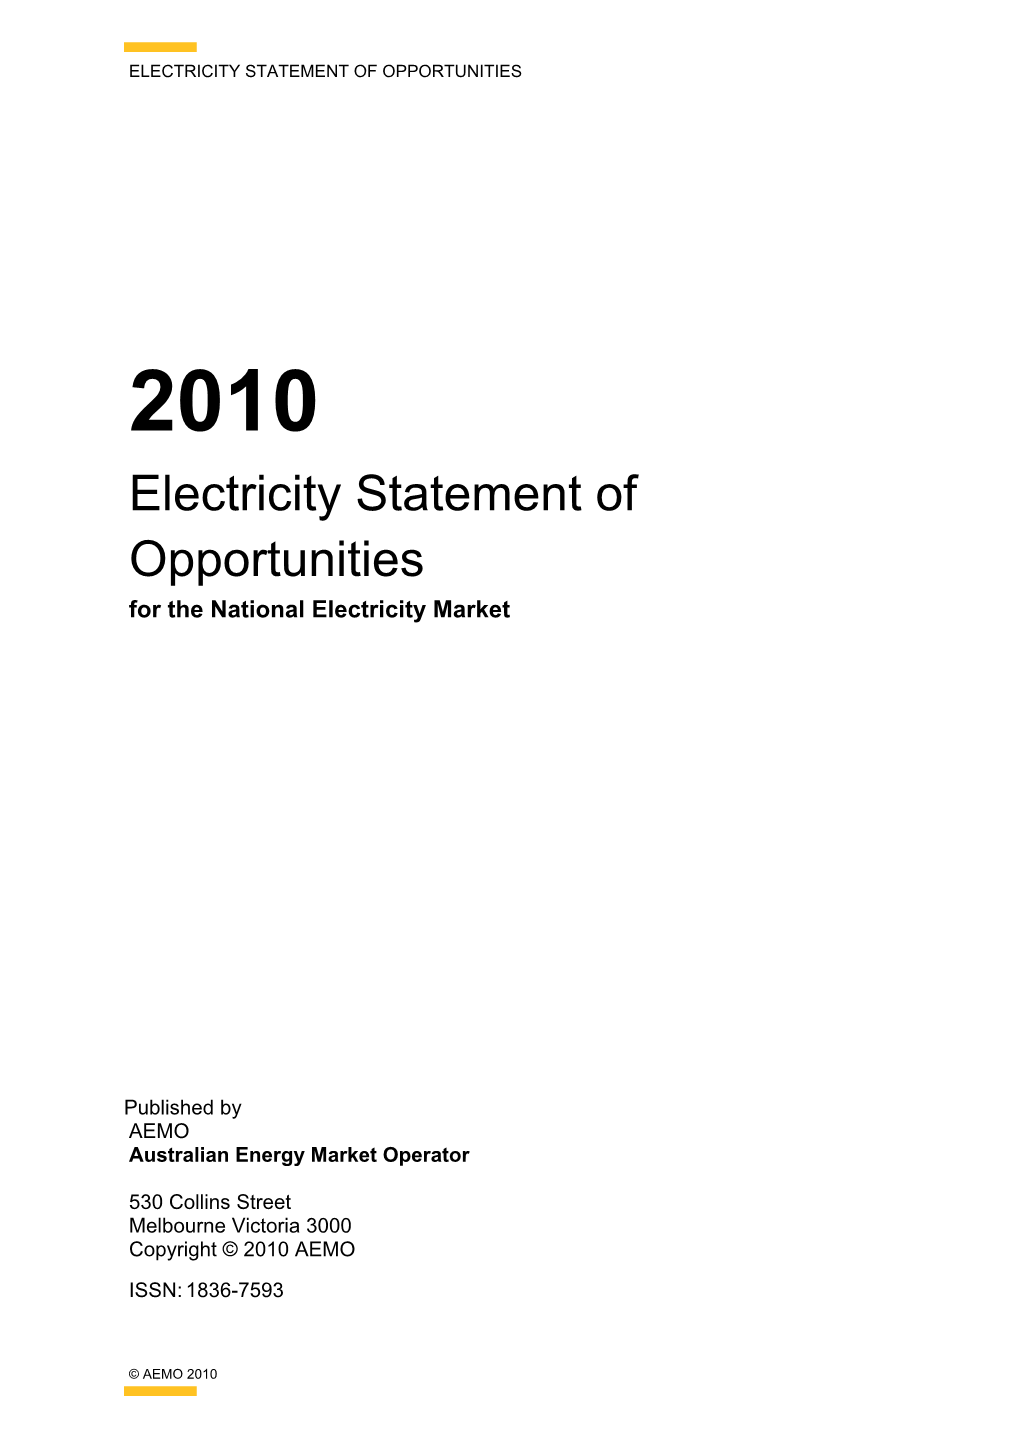 2010 Electricity Statement of Opportunities for the National Electricity Market